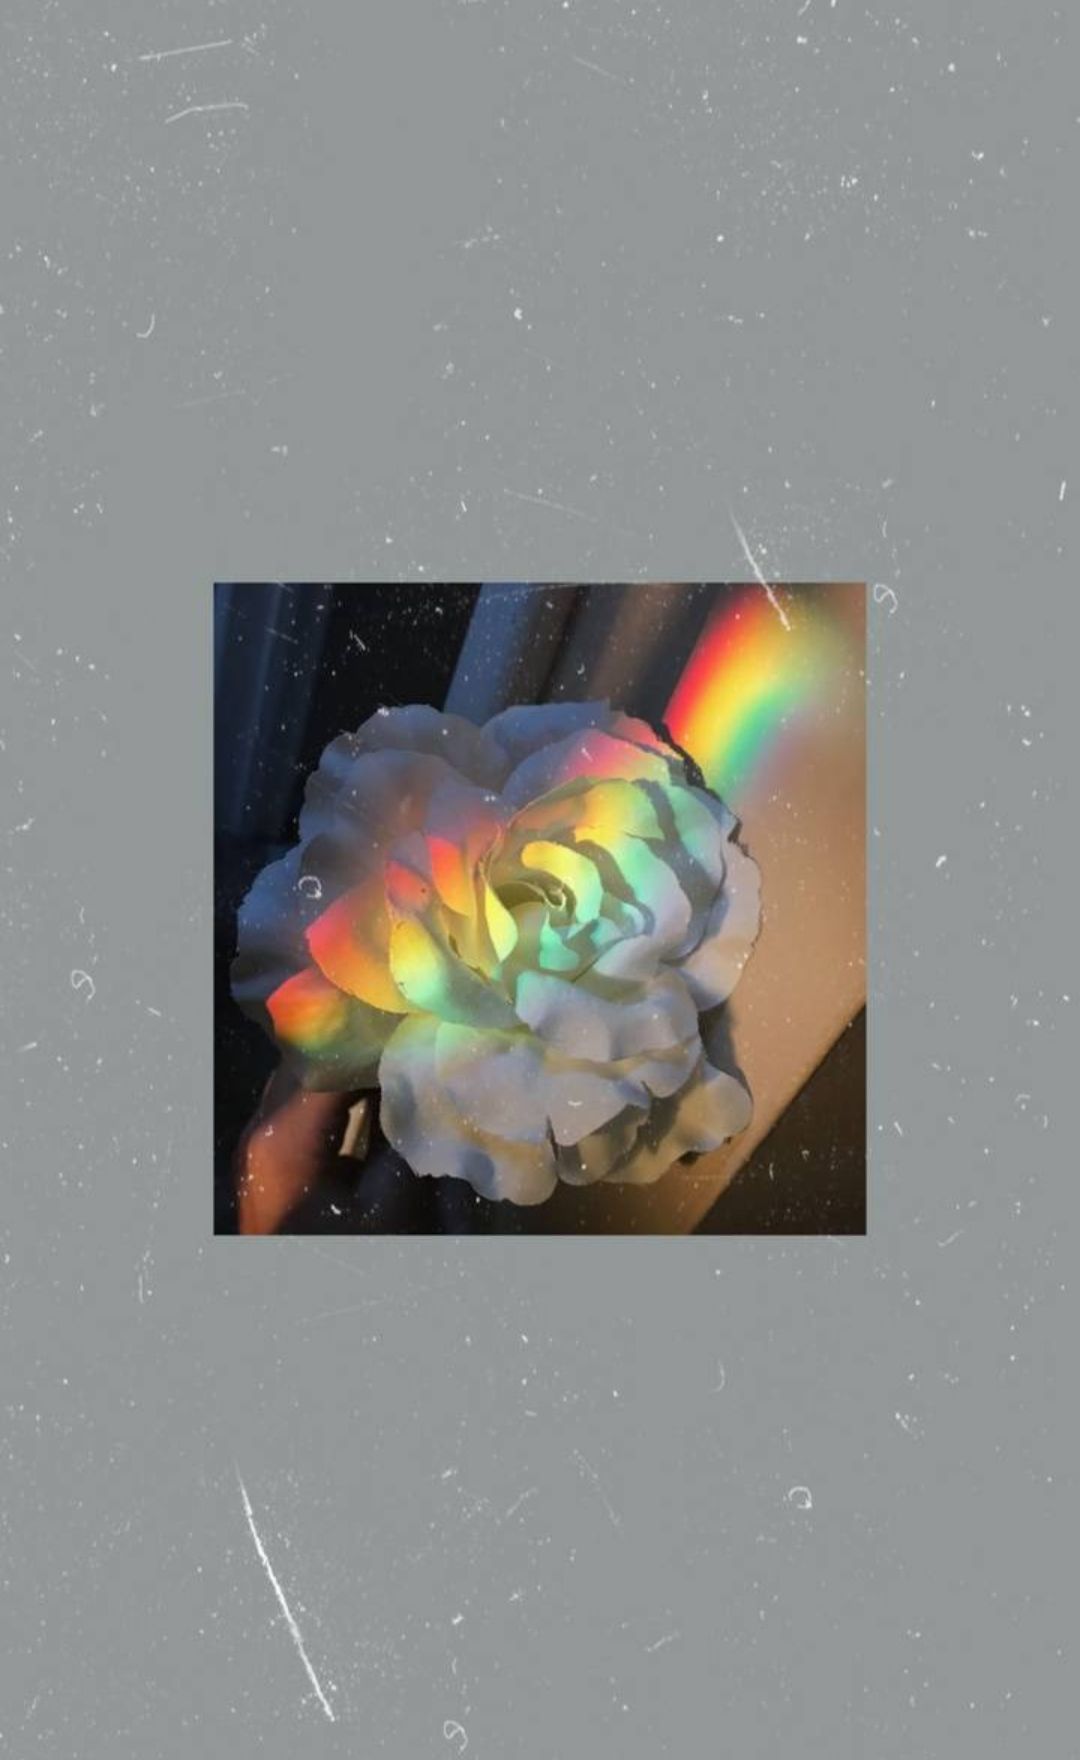 Aesthetic wallpaper with a rainbow rose - Rainbows